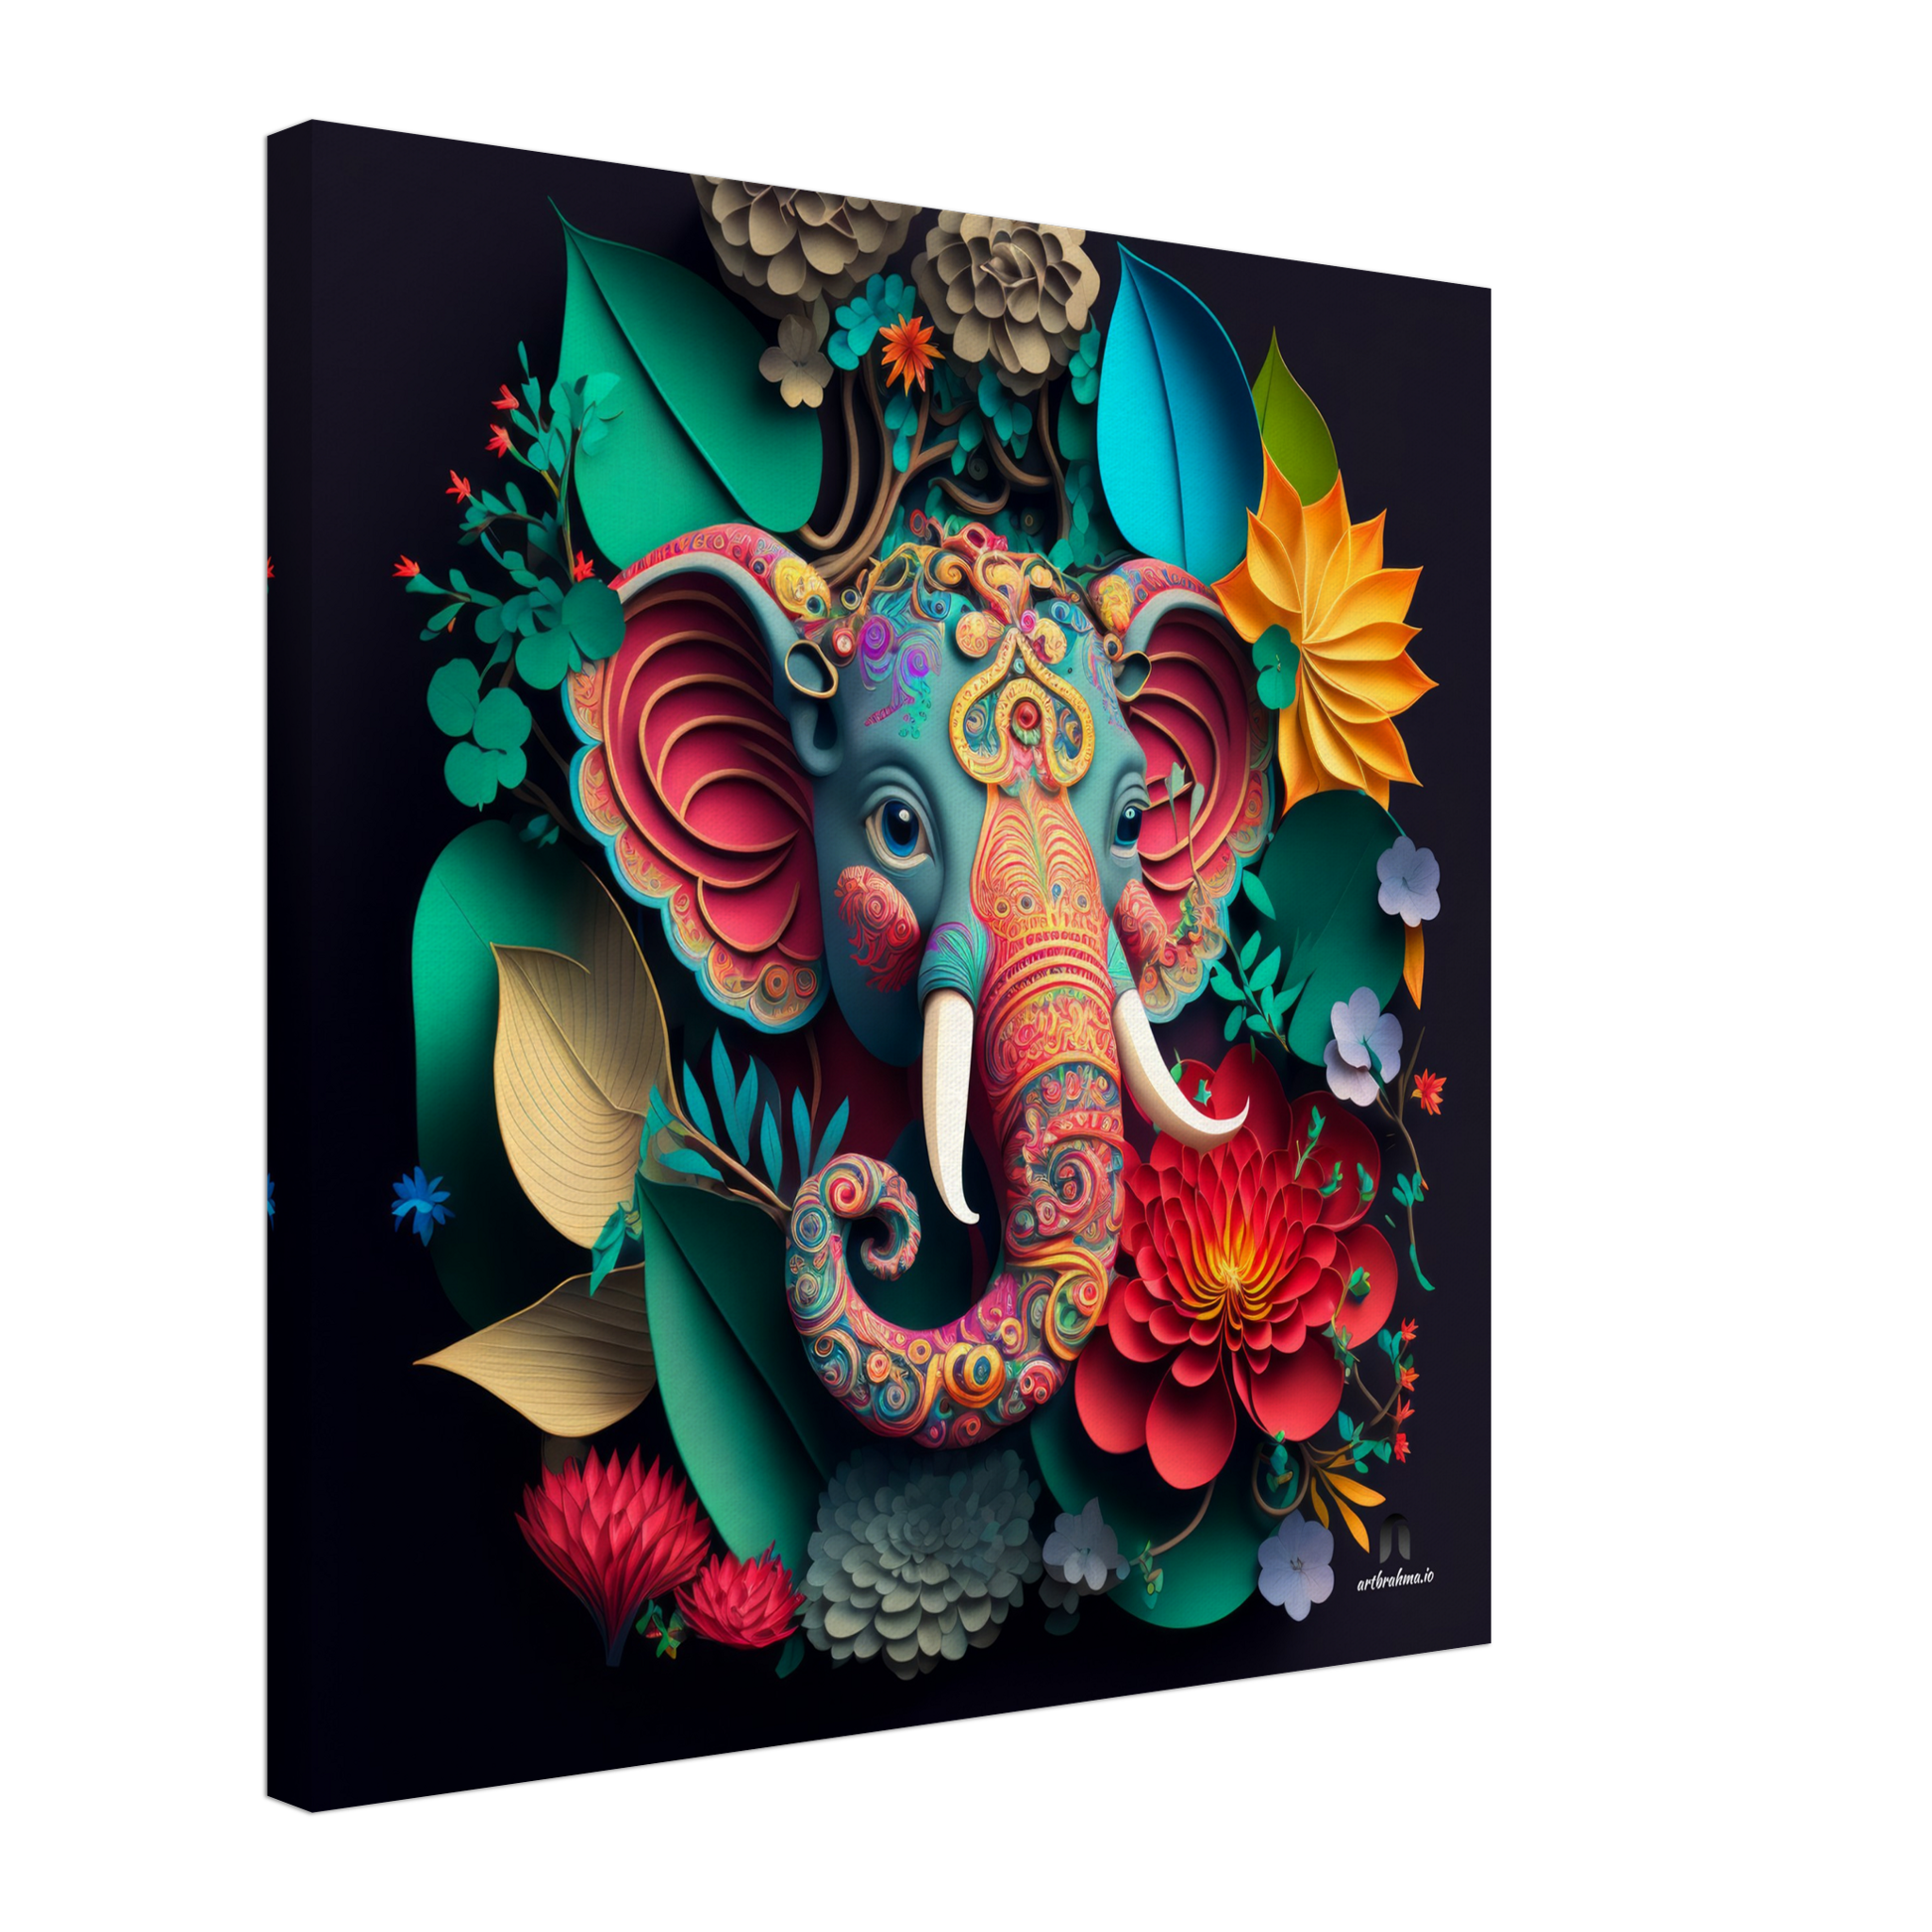 Vibrant Ganesha Wall Art Canvas - Bring Serenity to Your Home ( XL Canvas Sizes )